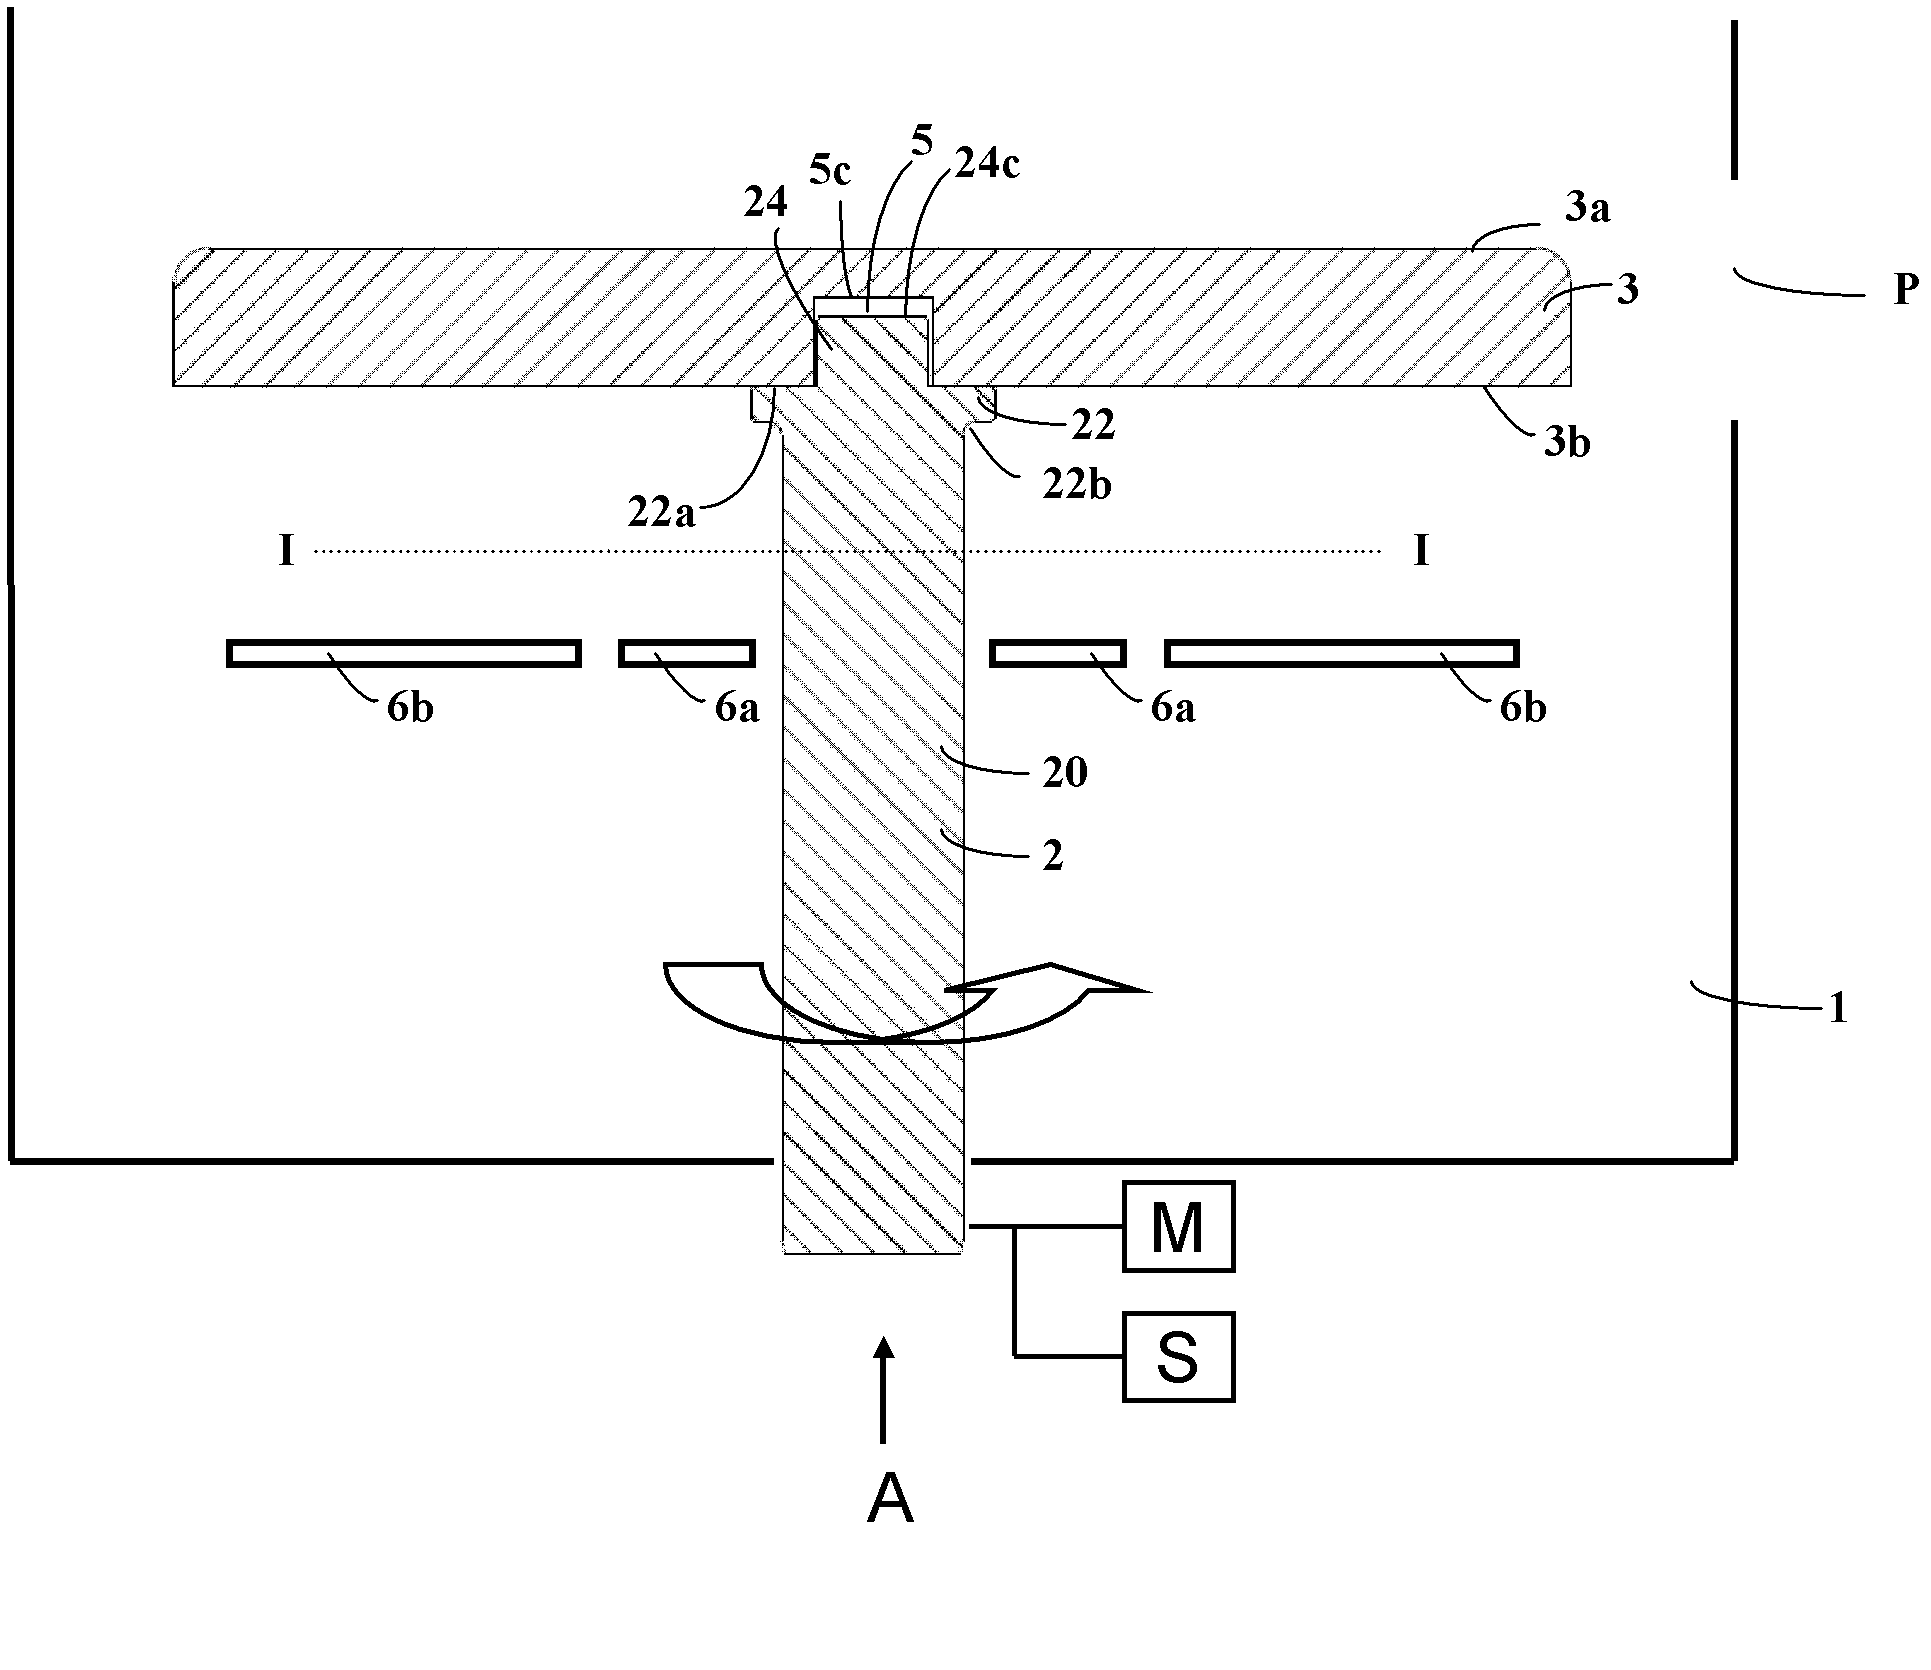 Chemical vapor deposition reactor or epitaxial layer growth reactor and support device thereof